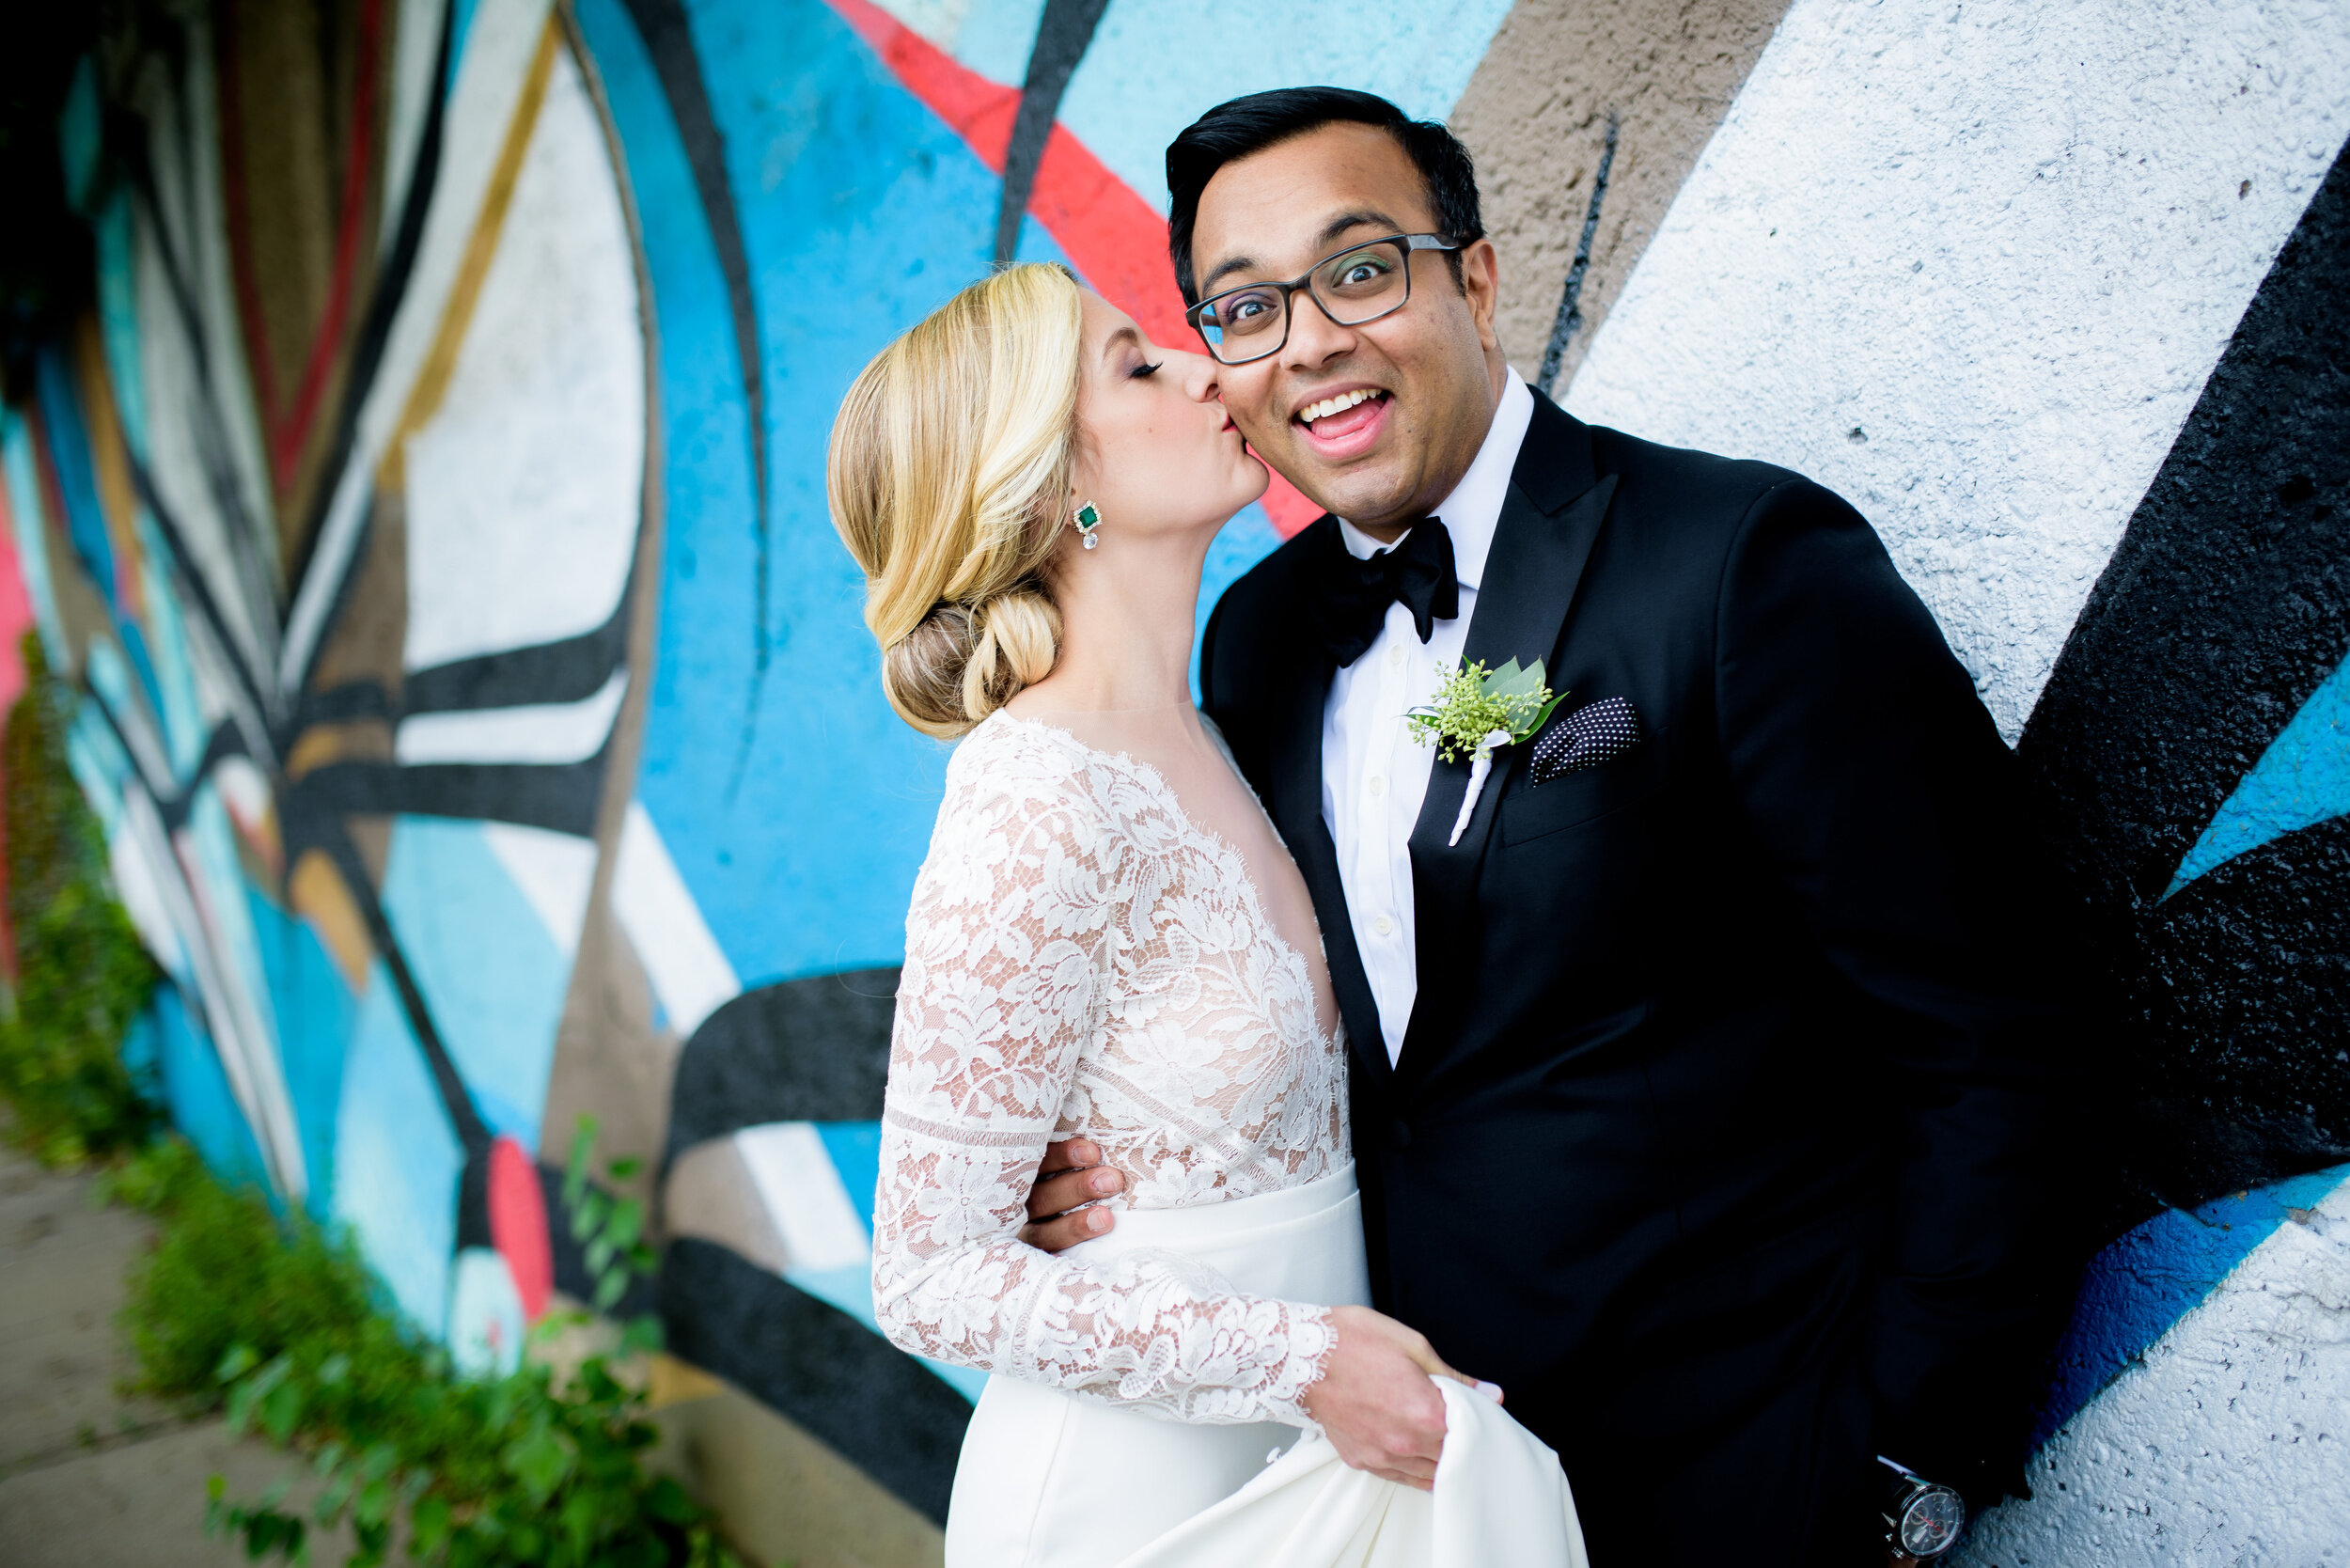 Fun photo of bride and groom on wedding day: Geraghty Chicago wedding photography captured by J. Brown Photography.